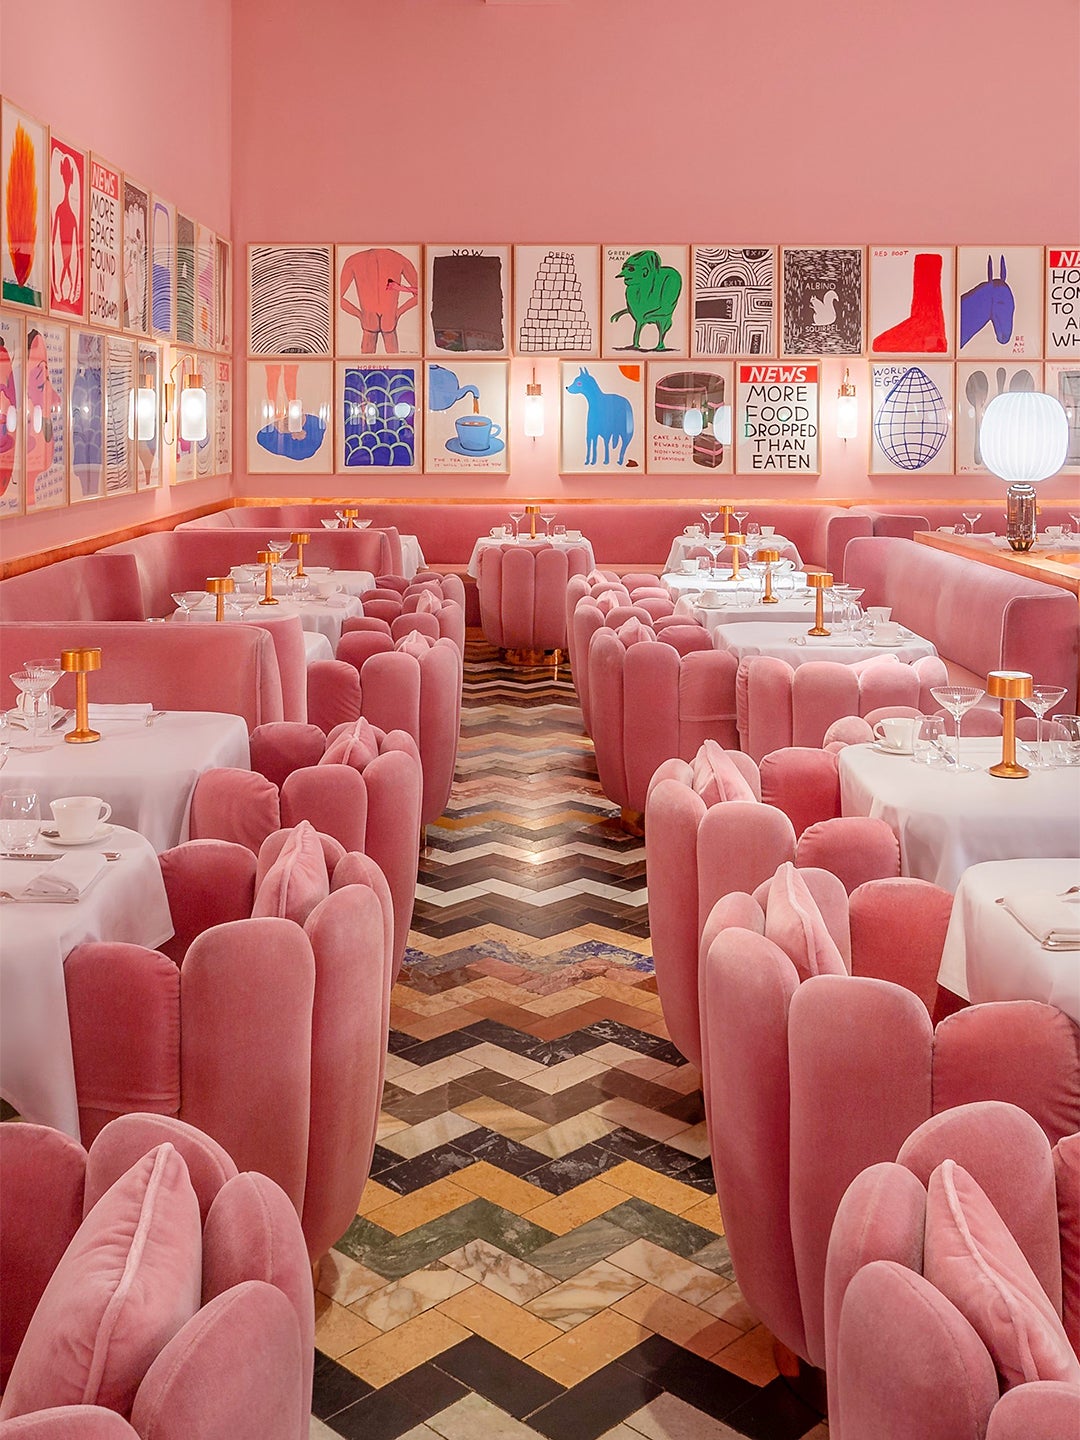 You Could Own One of the Famous Pink Chairs from Sketch London